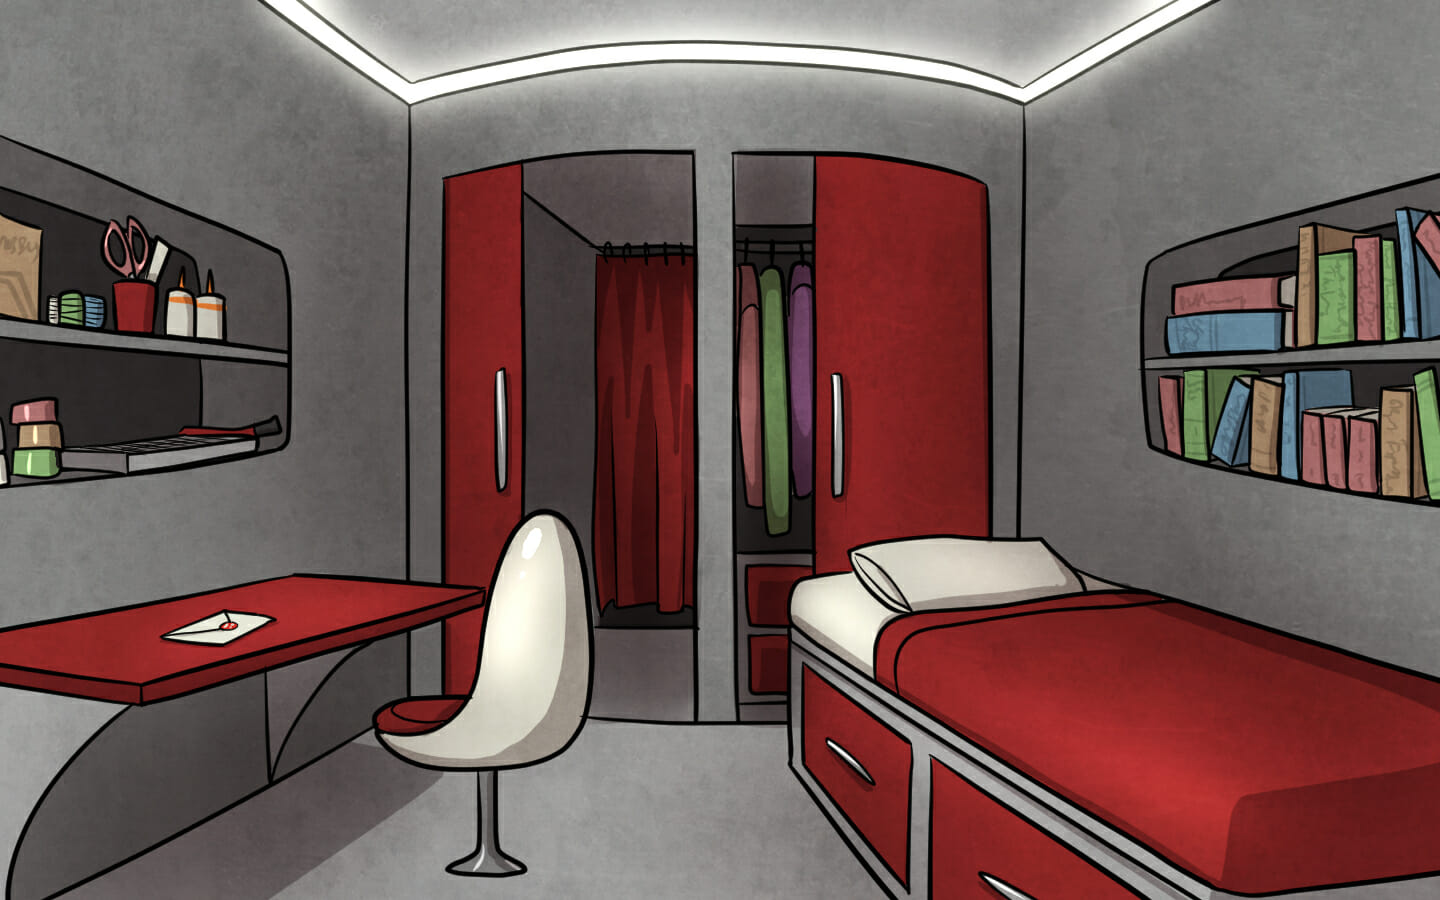 Timaeus's room. A small envelope sits on his desk.